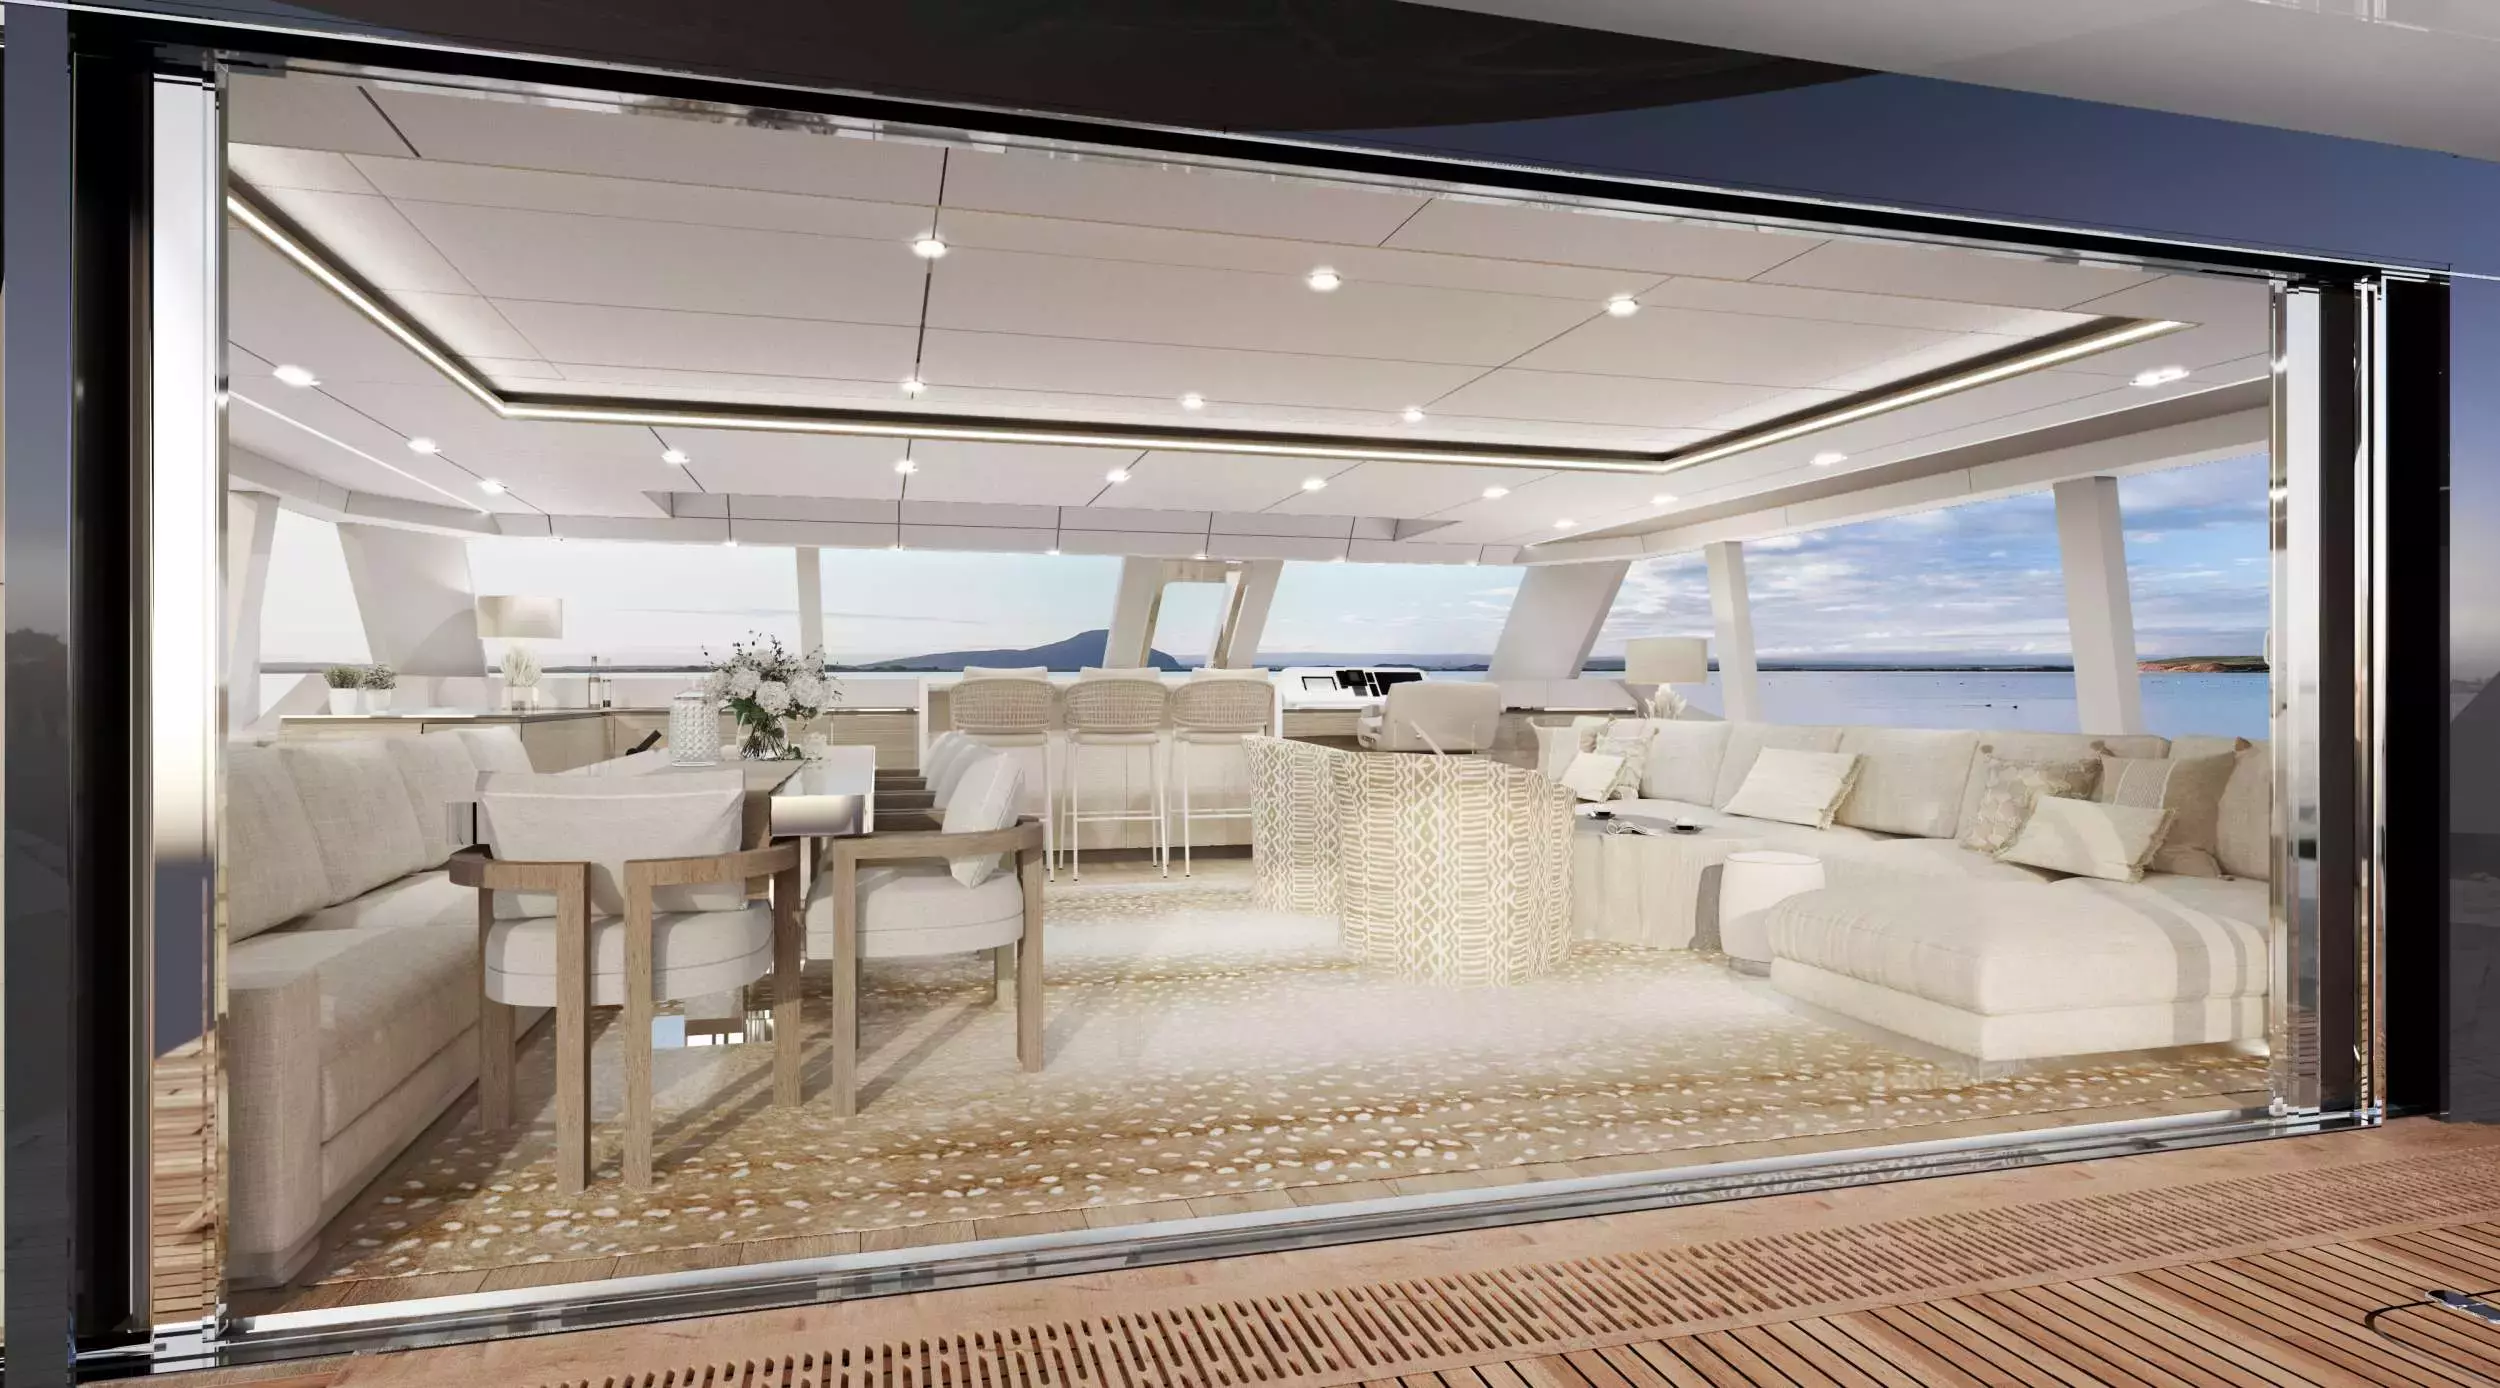 Sol by Sunreef Yachts - Top rates for a Charter of a private Luxury Catamaran in Bahamas